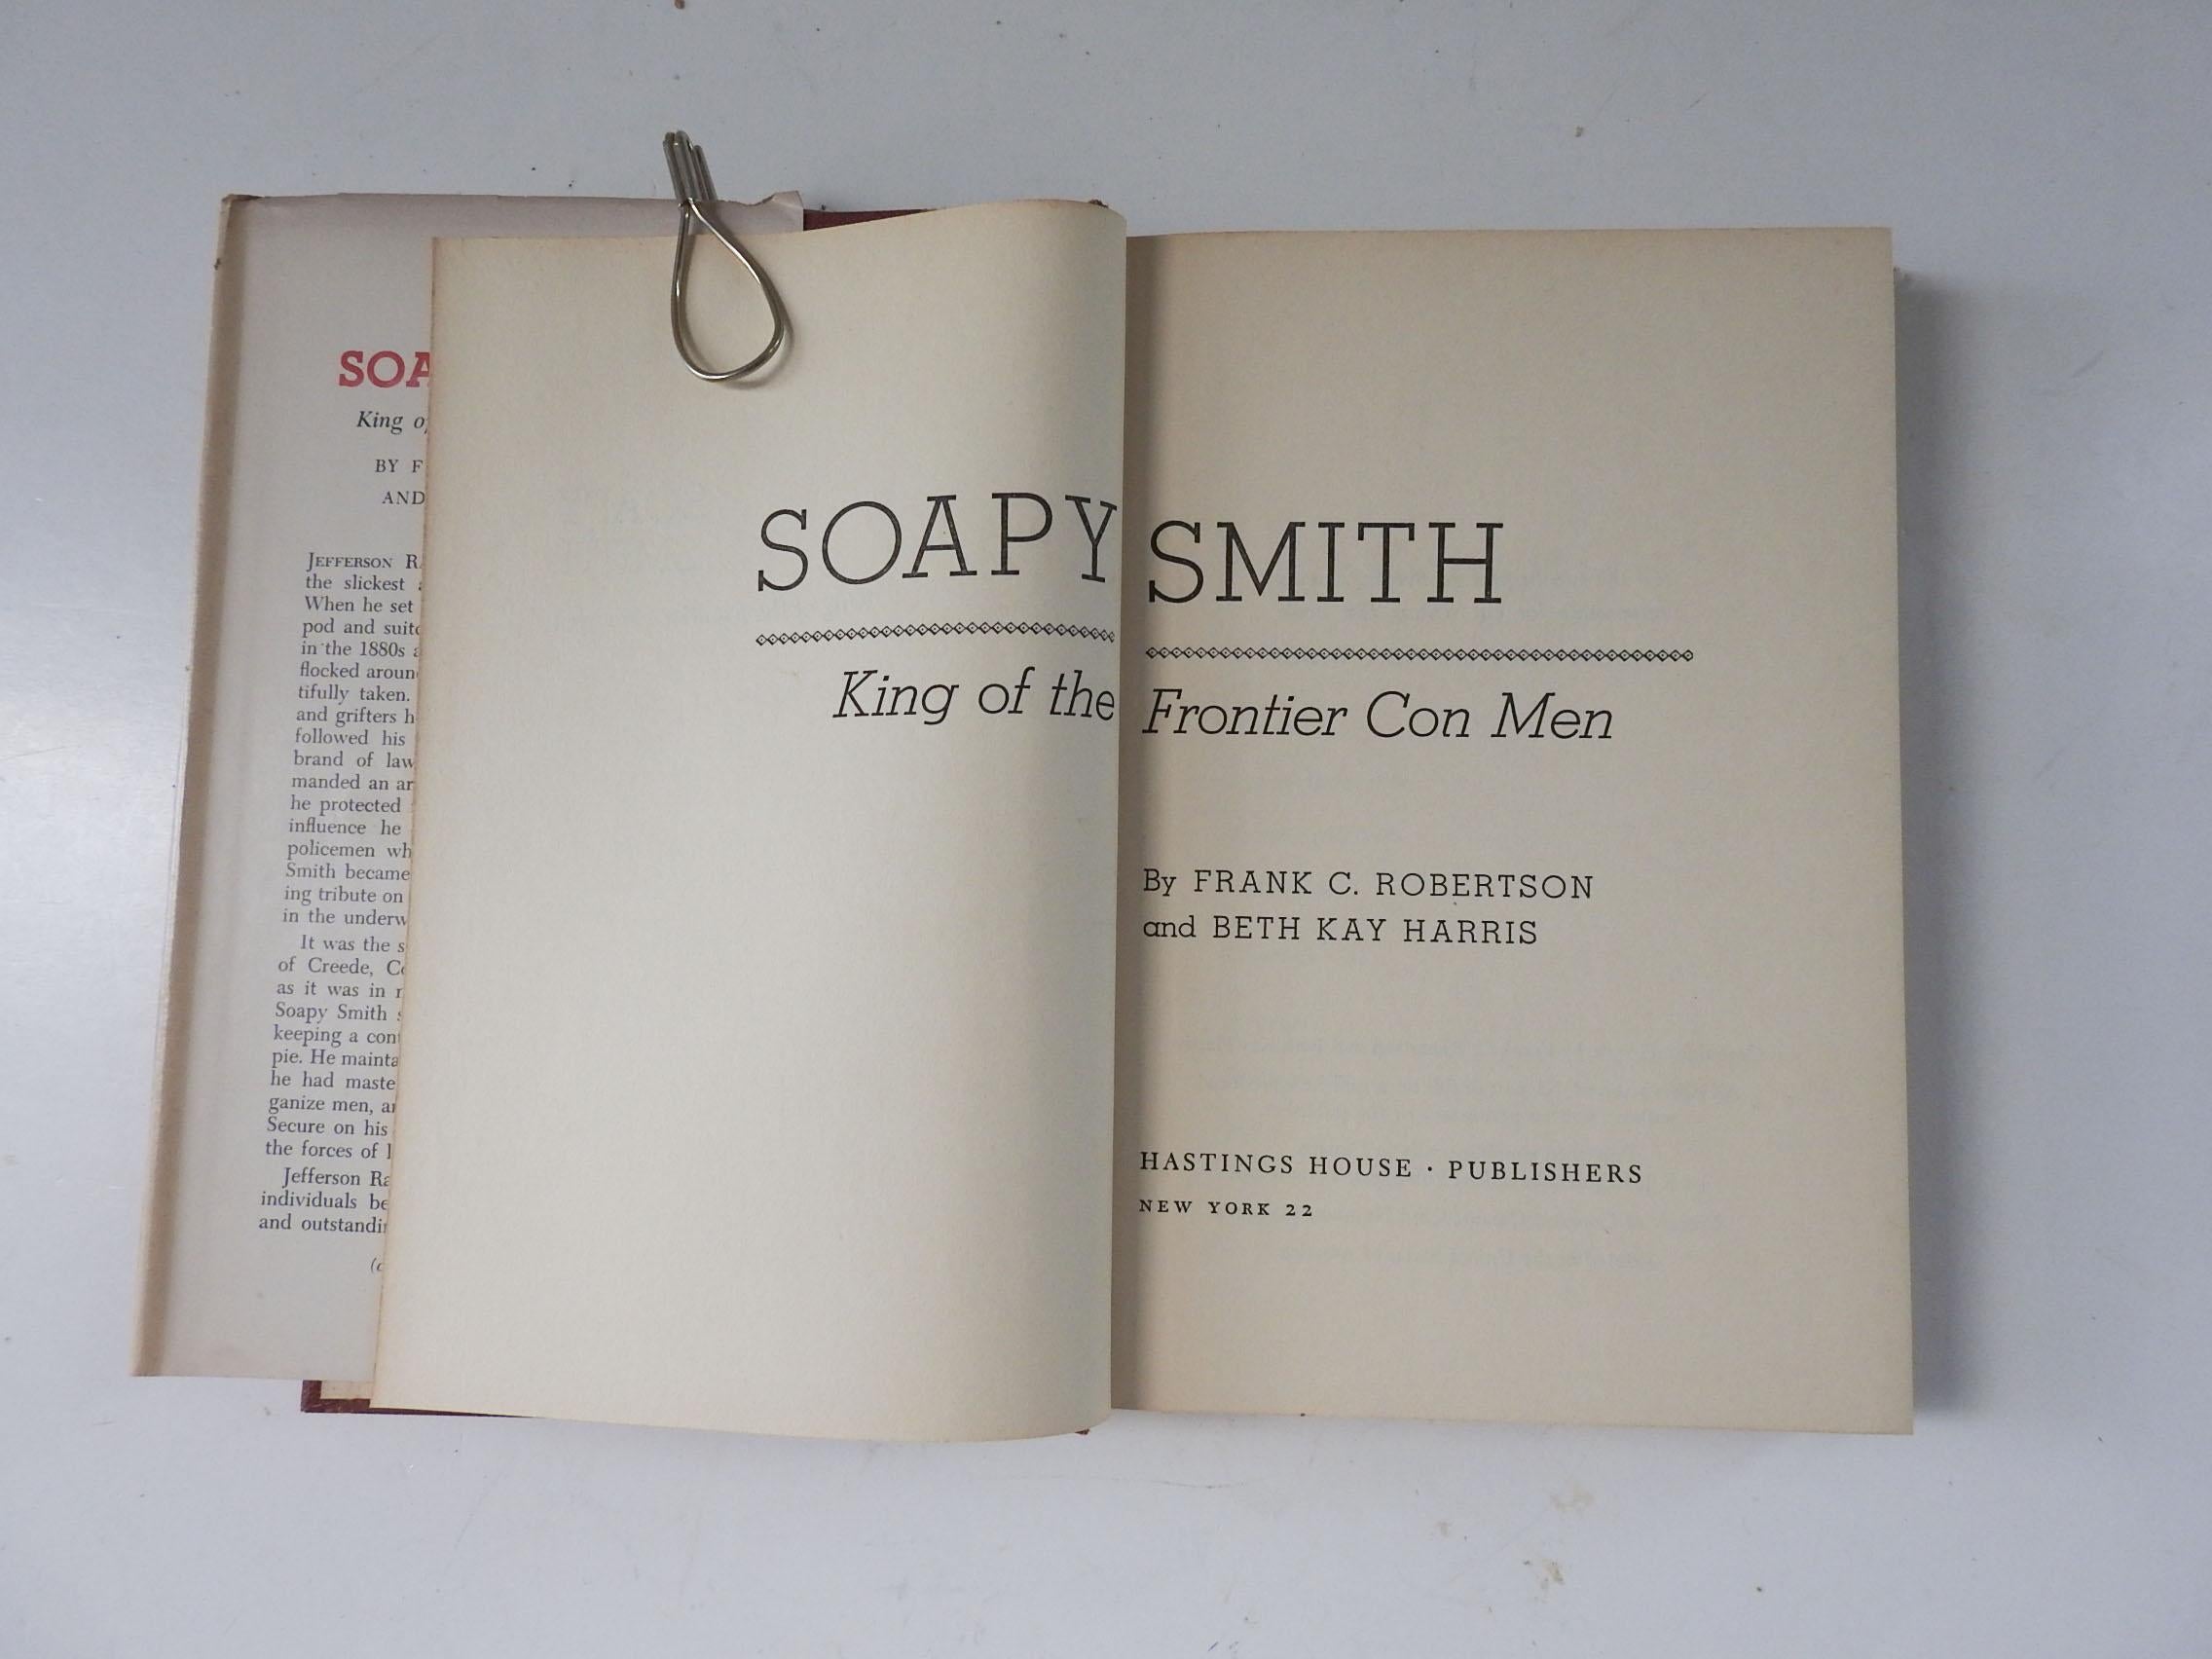 Soapy Smith: King of the Frontier Con Men by Frank C. Robertson and Beth Kay Harris.  Published by Hastings House, New York, 1961.  1880's con man working from Denver to Skagway.  Red cloth hardcover binding, illustrated dust jacket, edge wear, dust